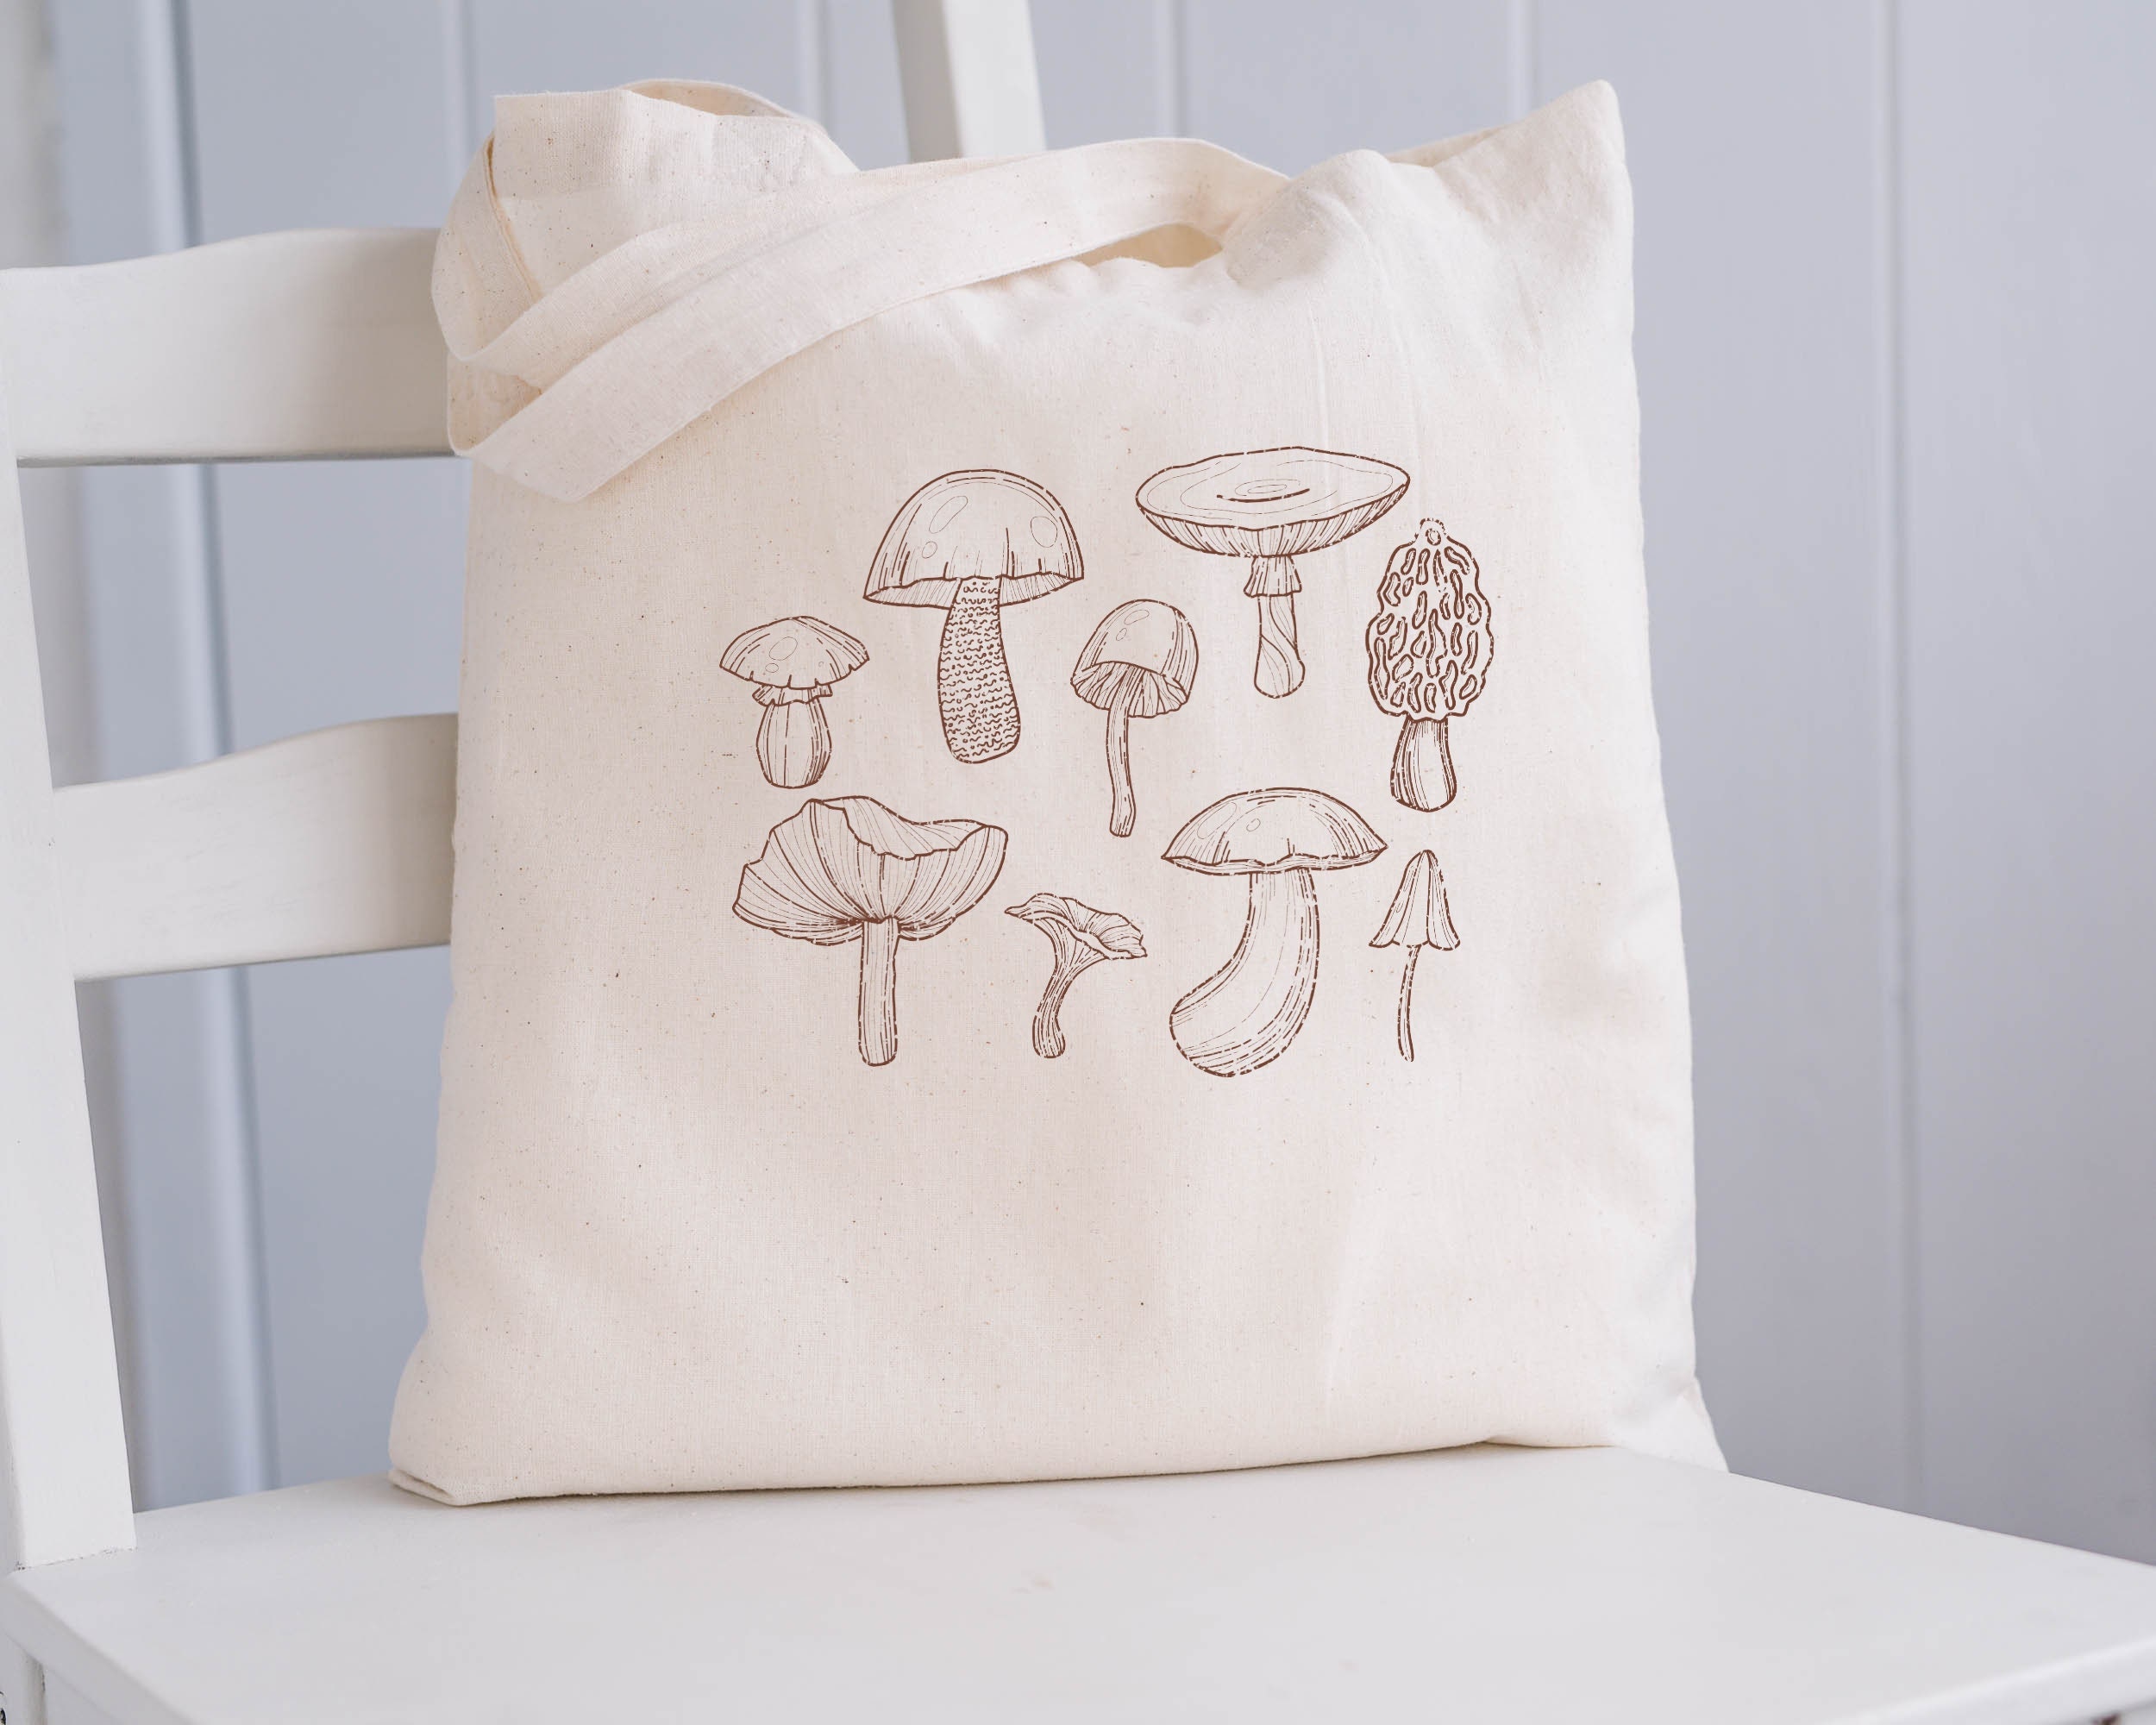 Shop CREATCABIN Mushroom Cotton Tote Bag Canvas 100% Cotton Reusable Shopping  Bags Beach Bag Summer Grocery Bags Eco-Friendly Aesthetic DIY Craft  Multi-Function for Women Gifts Daily Life 13.3 x 15 Inch for